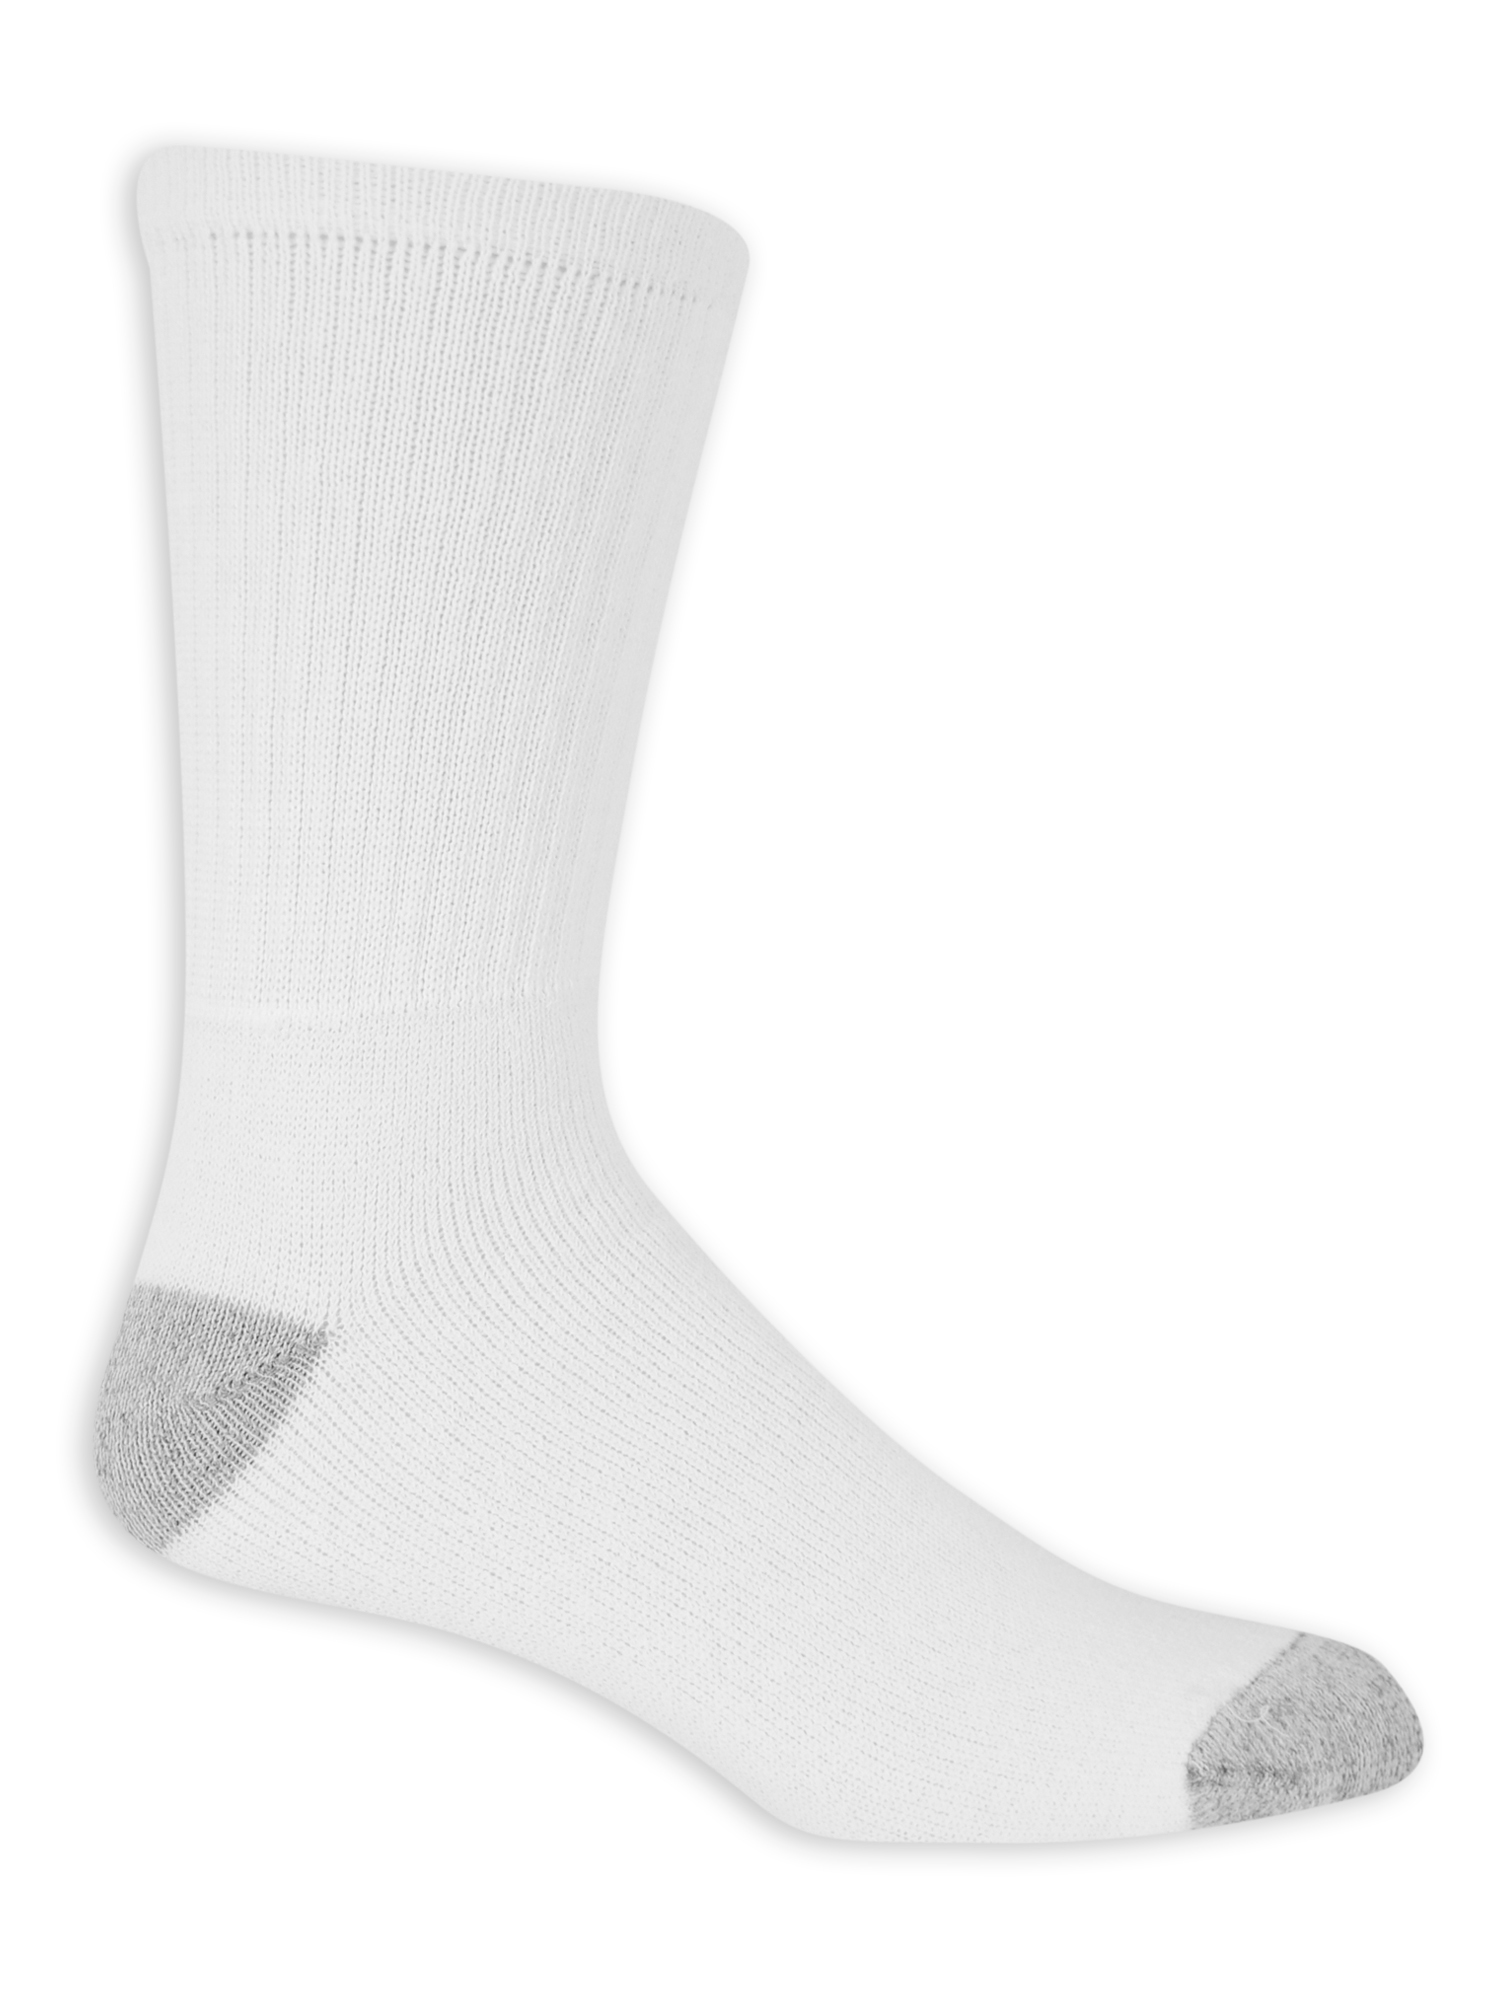 Athletic Works Men's Crew Socks Extra Value 20 Pack - image 2 of 2